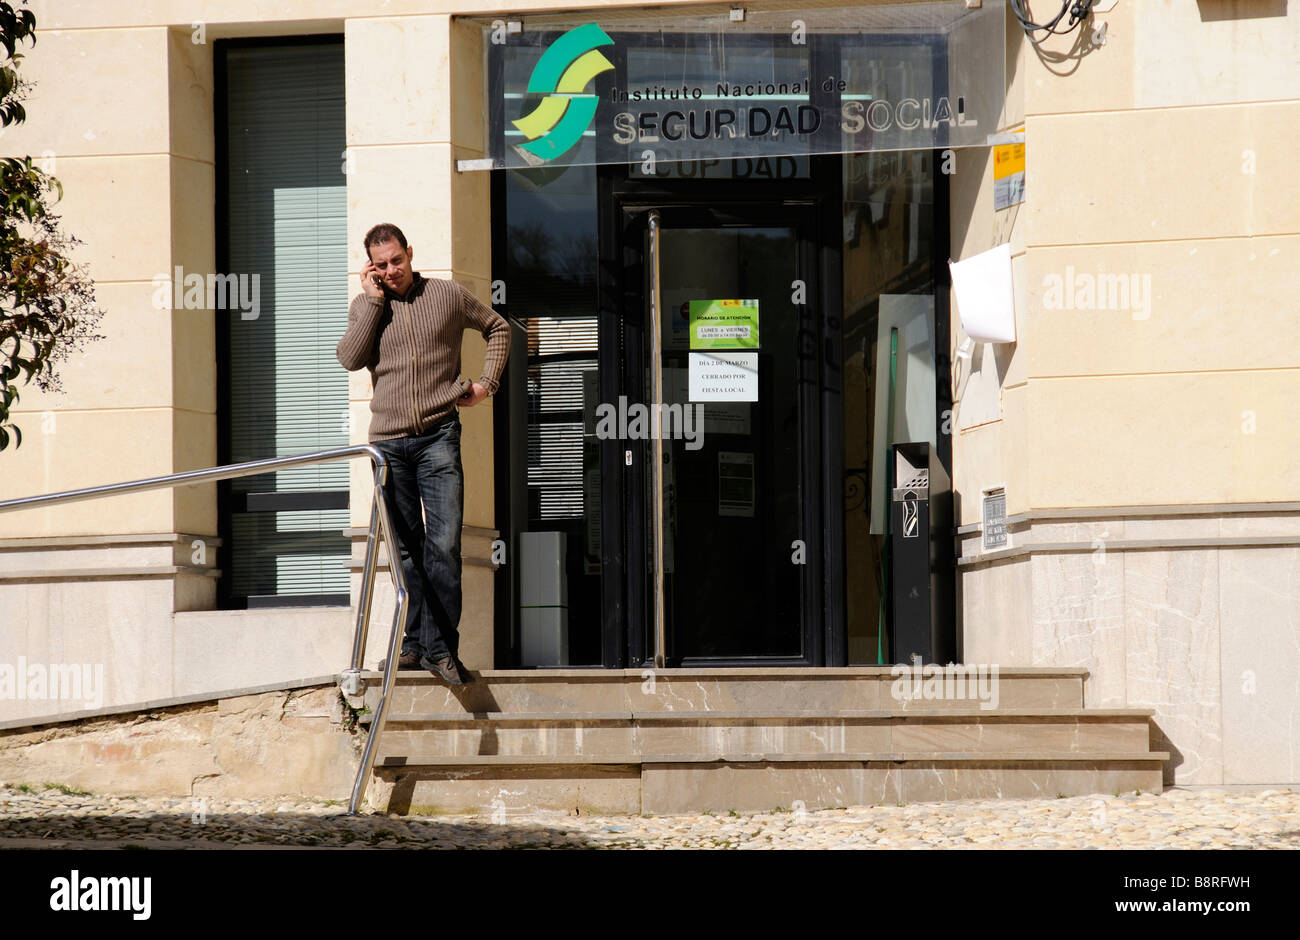 Social Security office exterior and man standing outside using a mobile phone Stock Photo